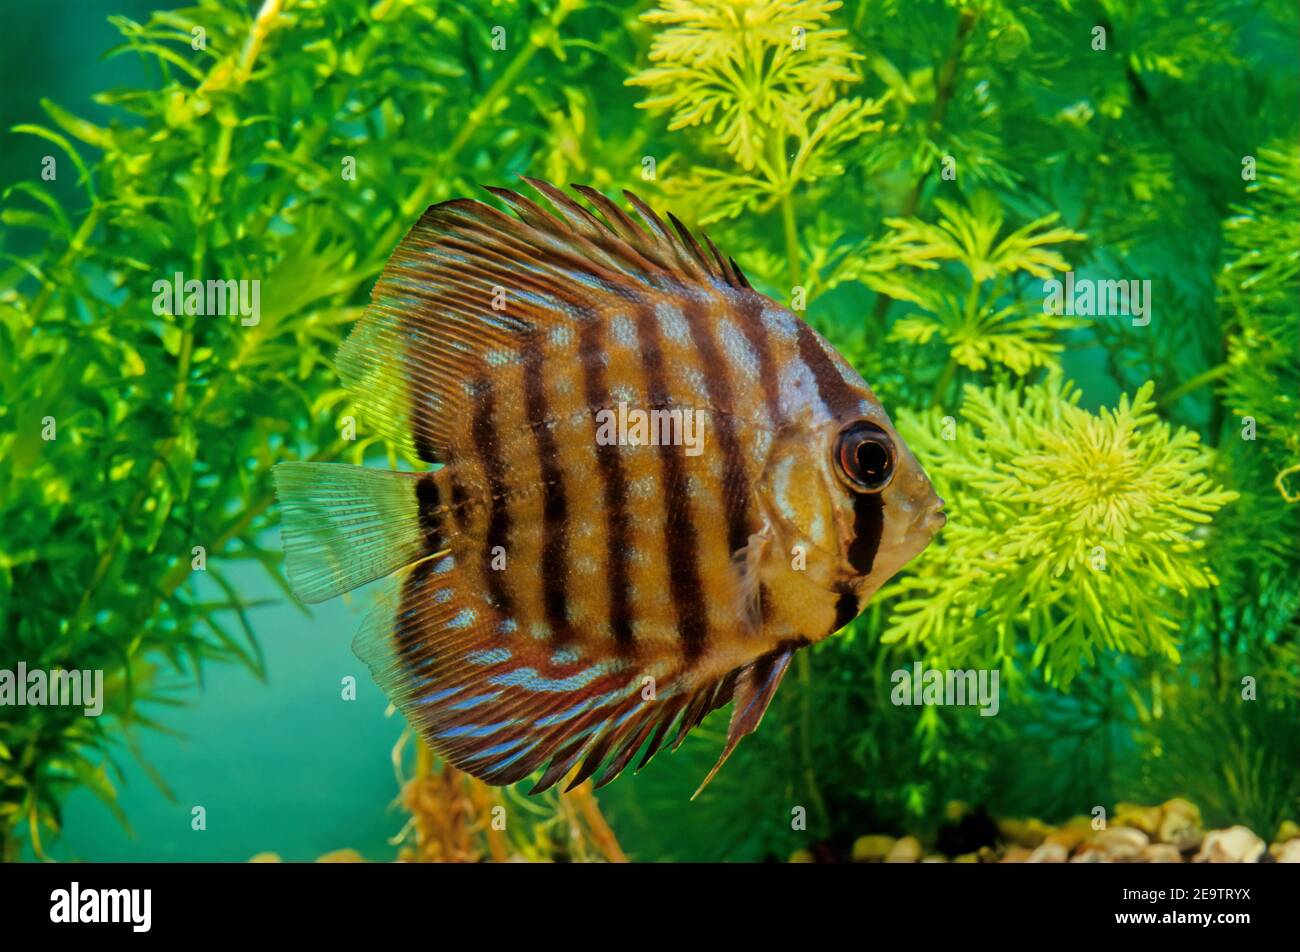 Symphysodon aequifasciatus, the blue discus or brown discus, is a species of cichlid native to rivers of the eastern and central Amazon Basin downrive Stock Photo